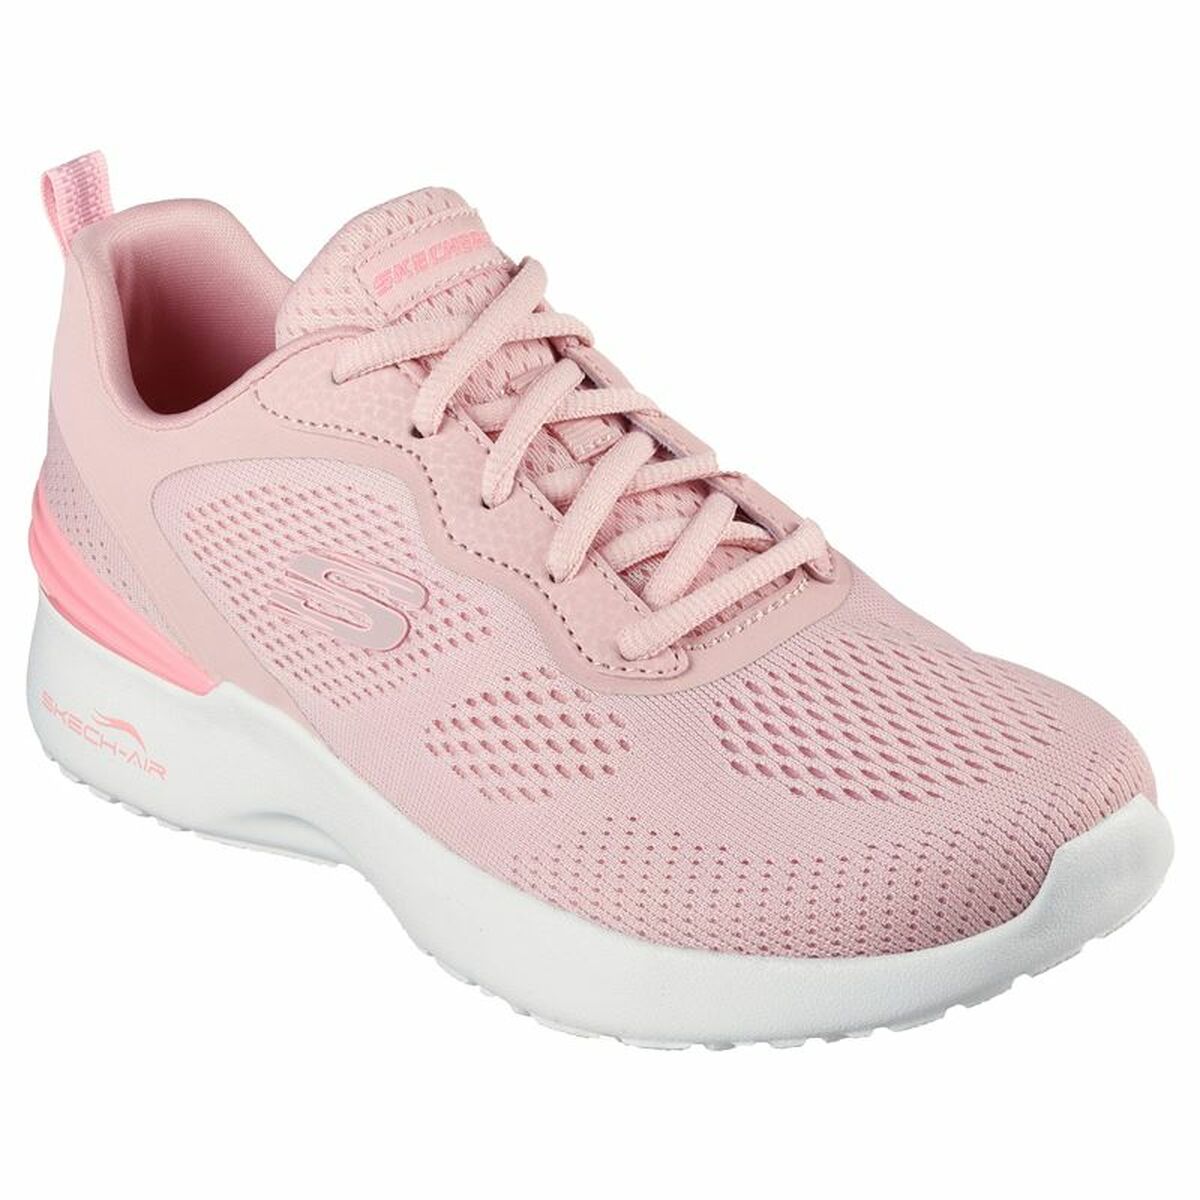 Sports Trainers for Women Skechers Skech-Air Dynamight - New Grind Light Pink